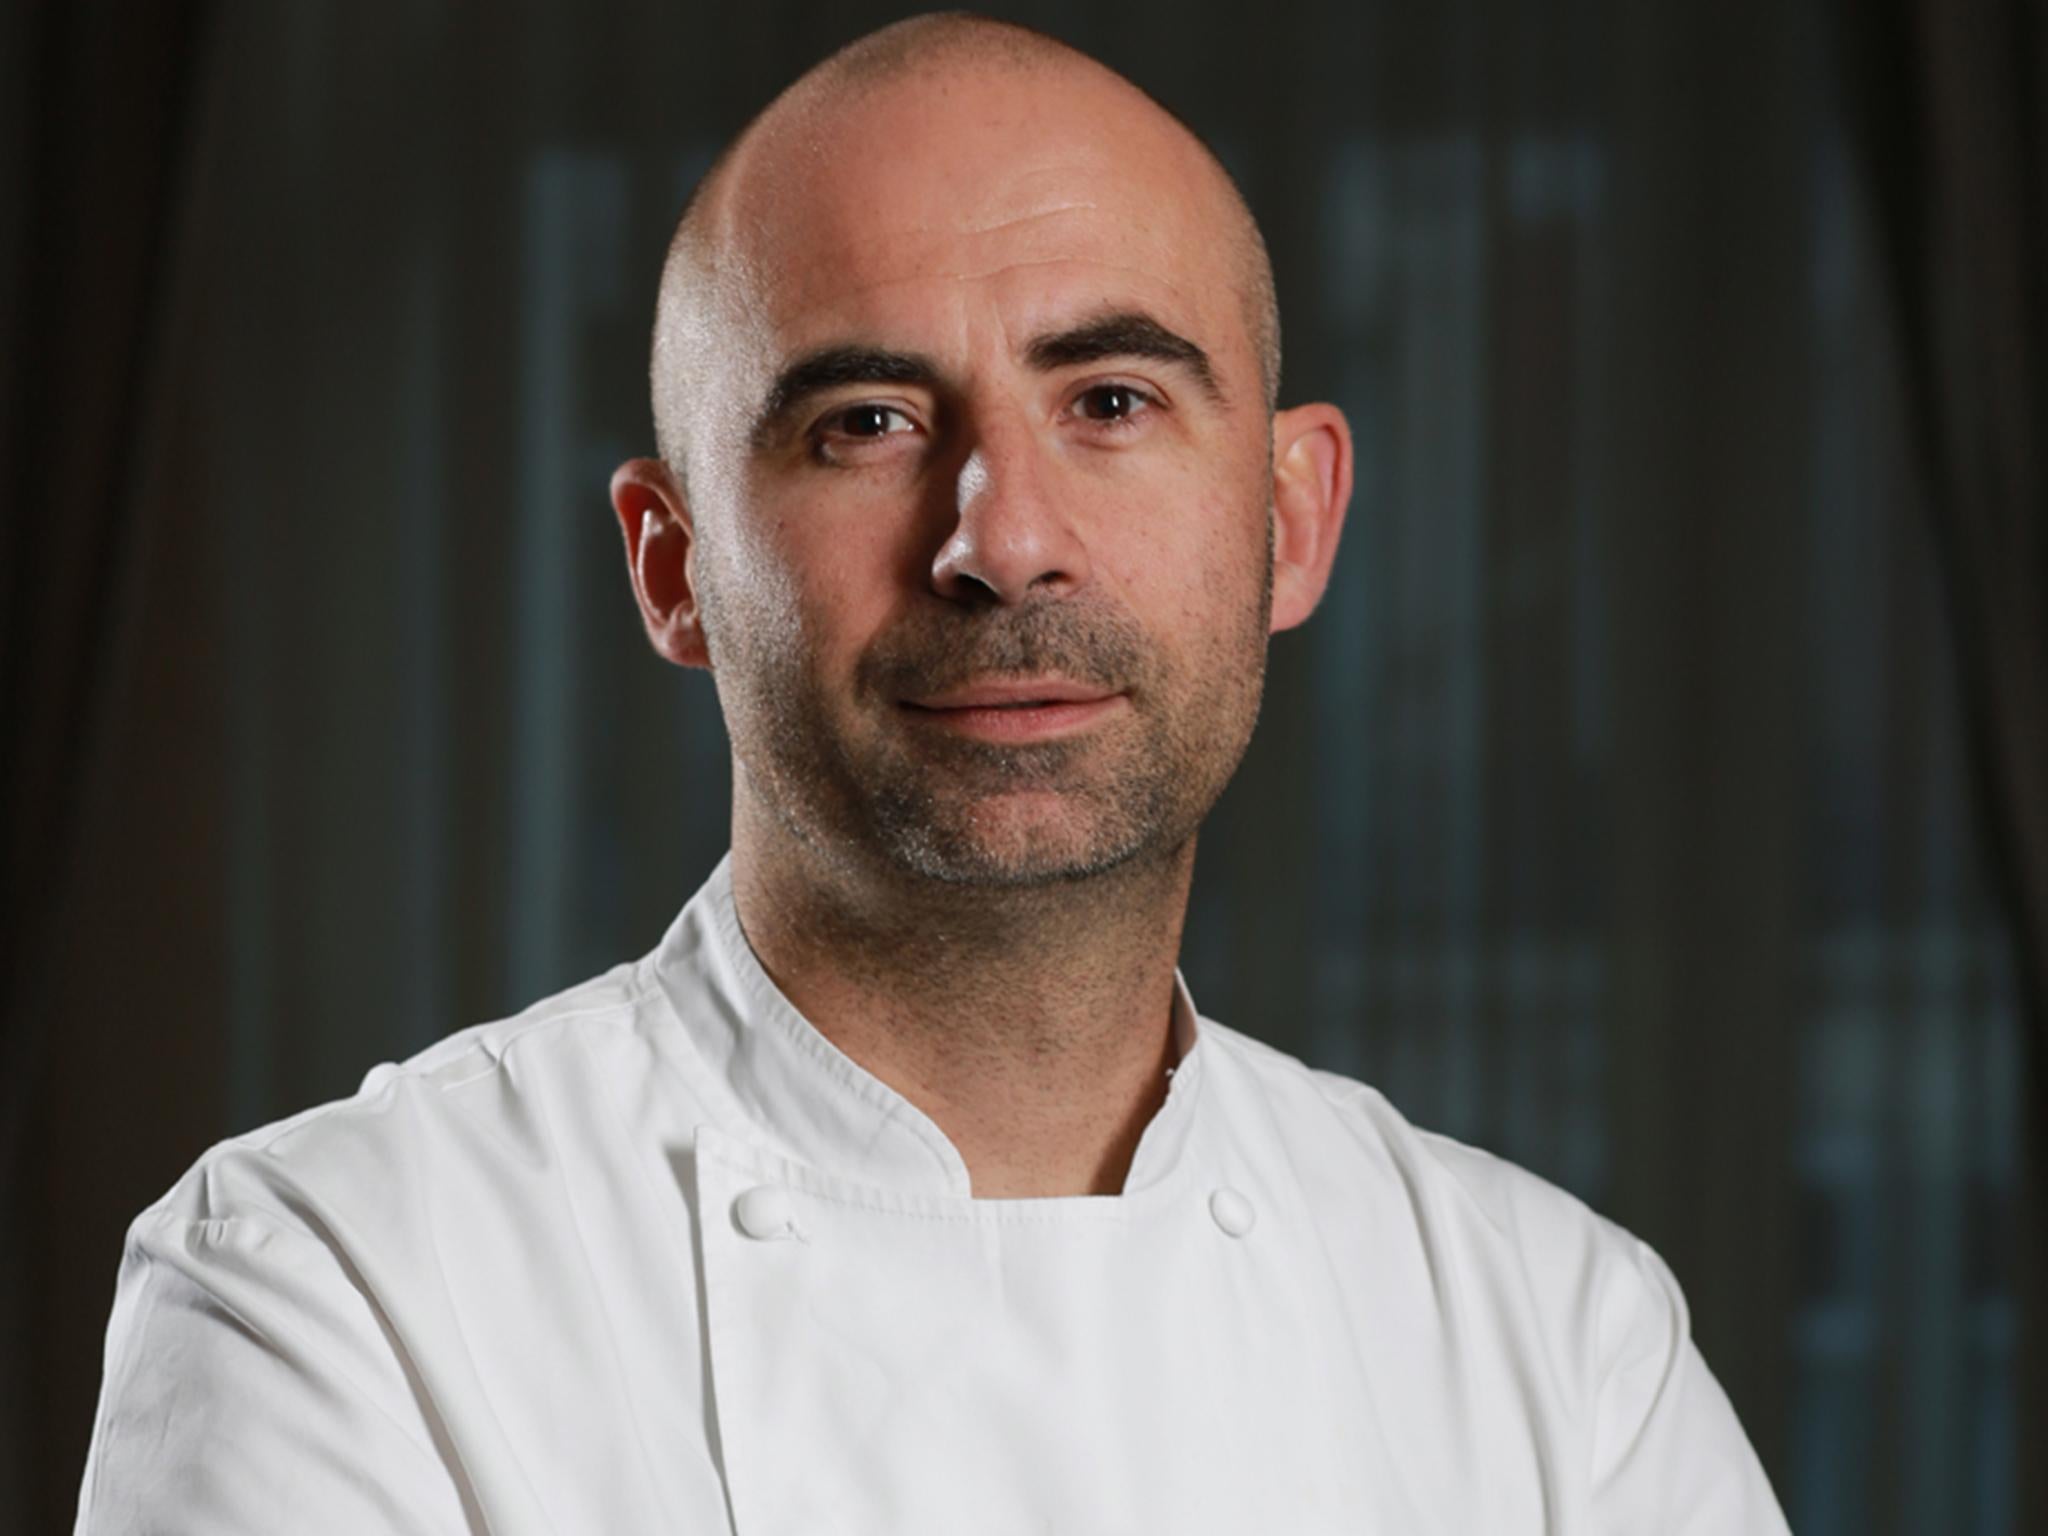 Éric Chavot is a Michelin-starred chef